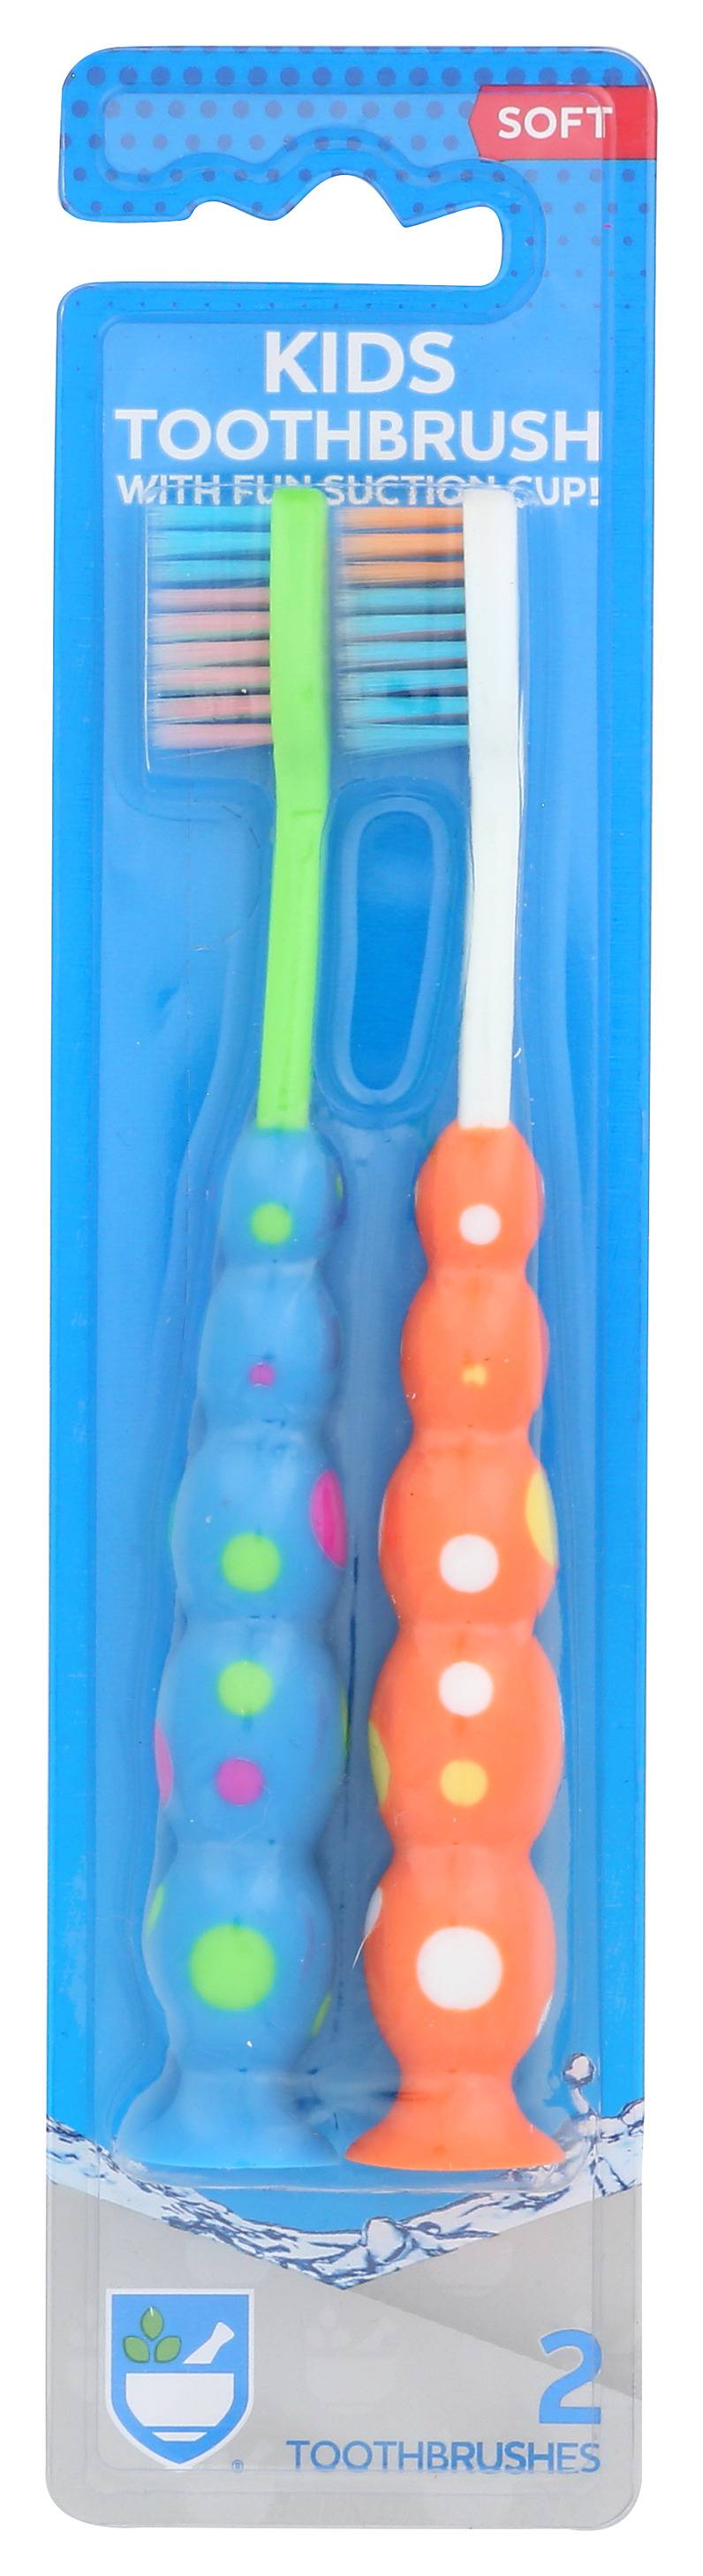 Rite Aid Kids Toothbrush With Fun Suction Cup (2 ct)